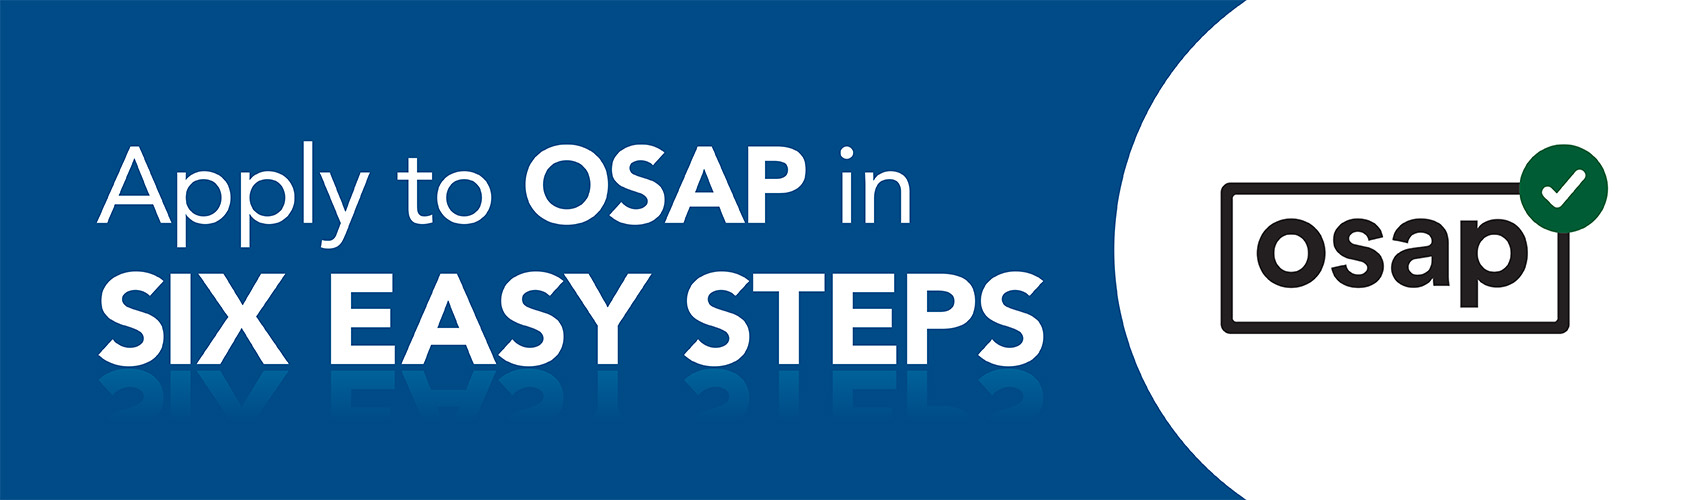 "Apply to OSAP in SIX EASY STEPS" on a navy blue background, with the OSAP logo in a white circle on the right-hand side